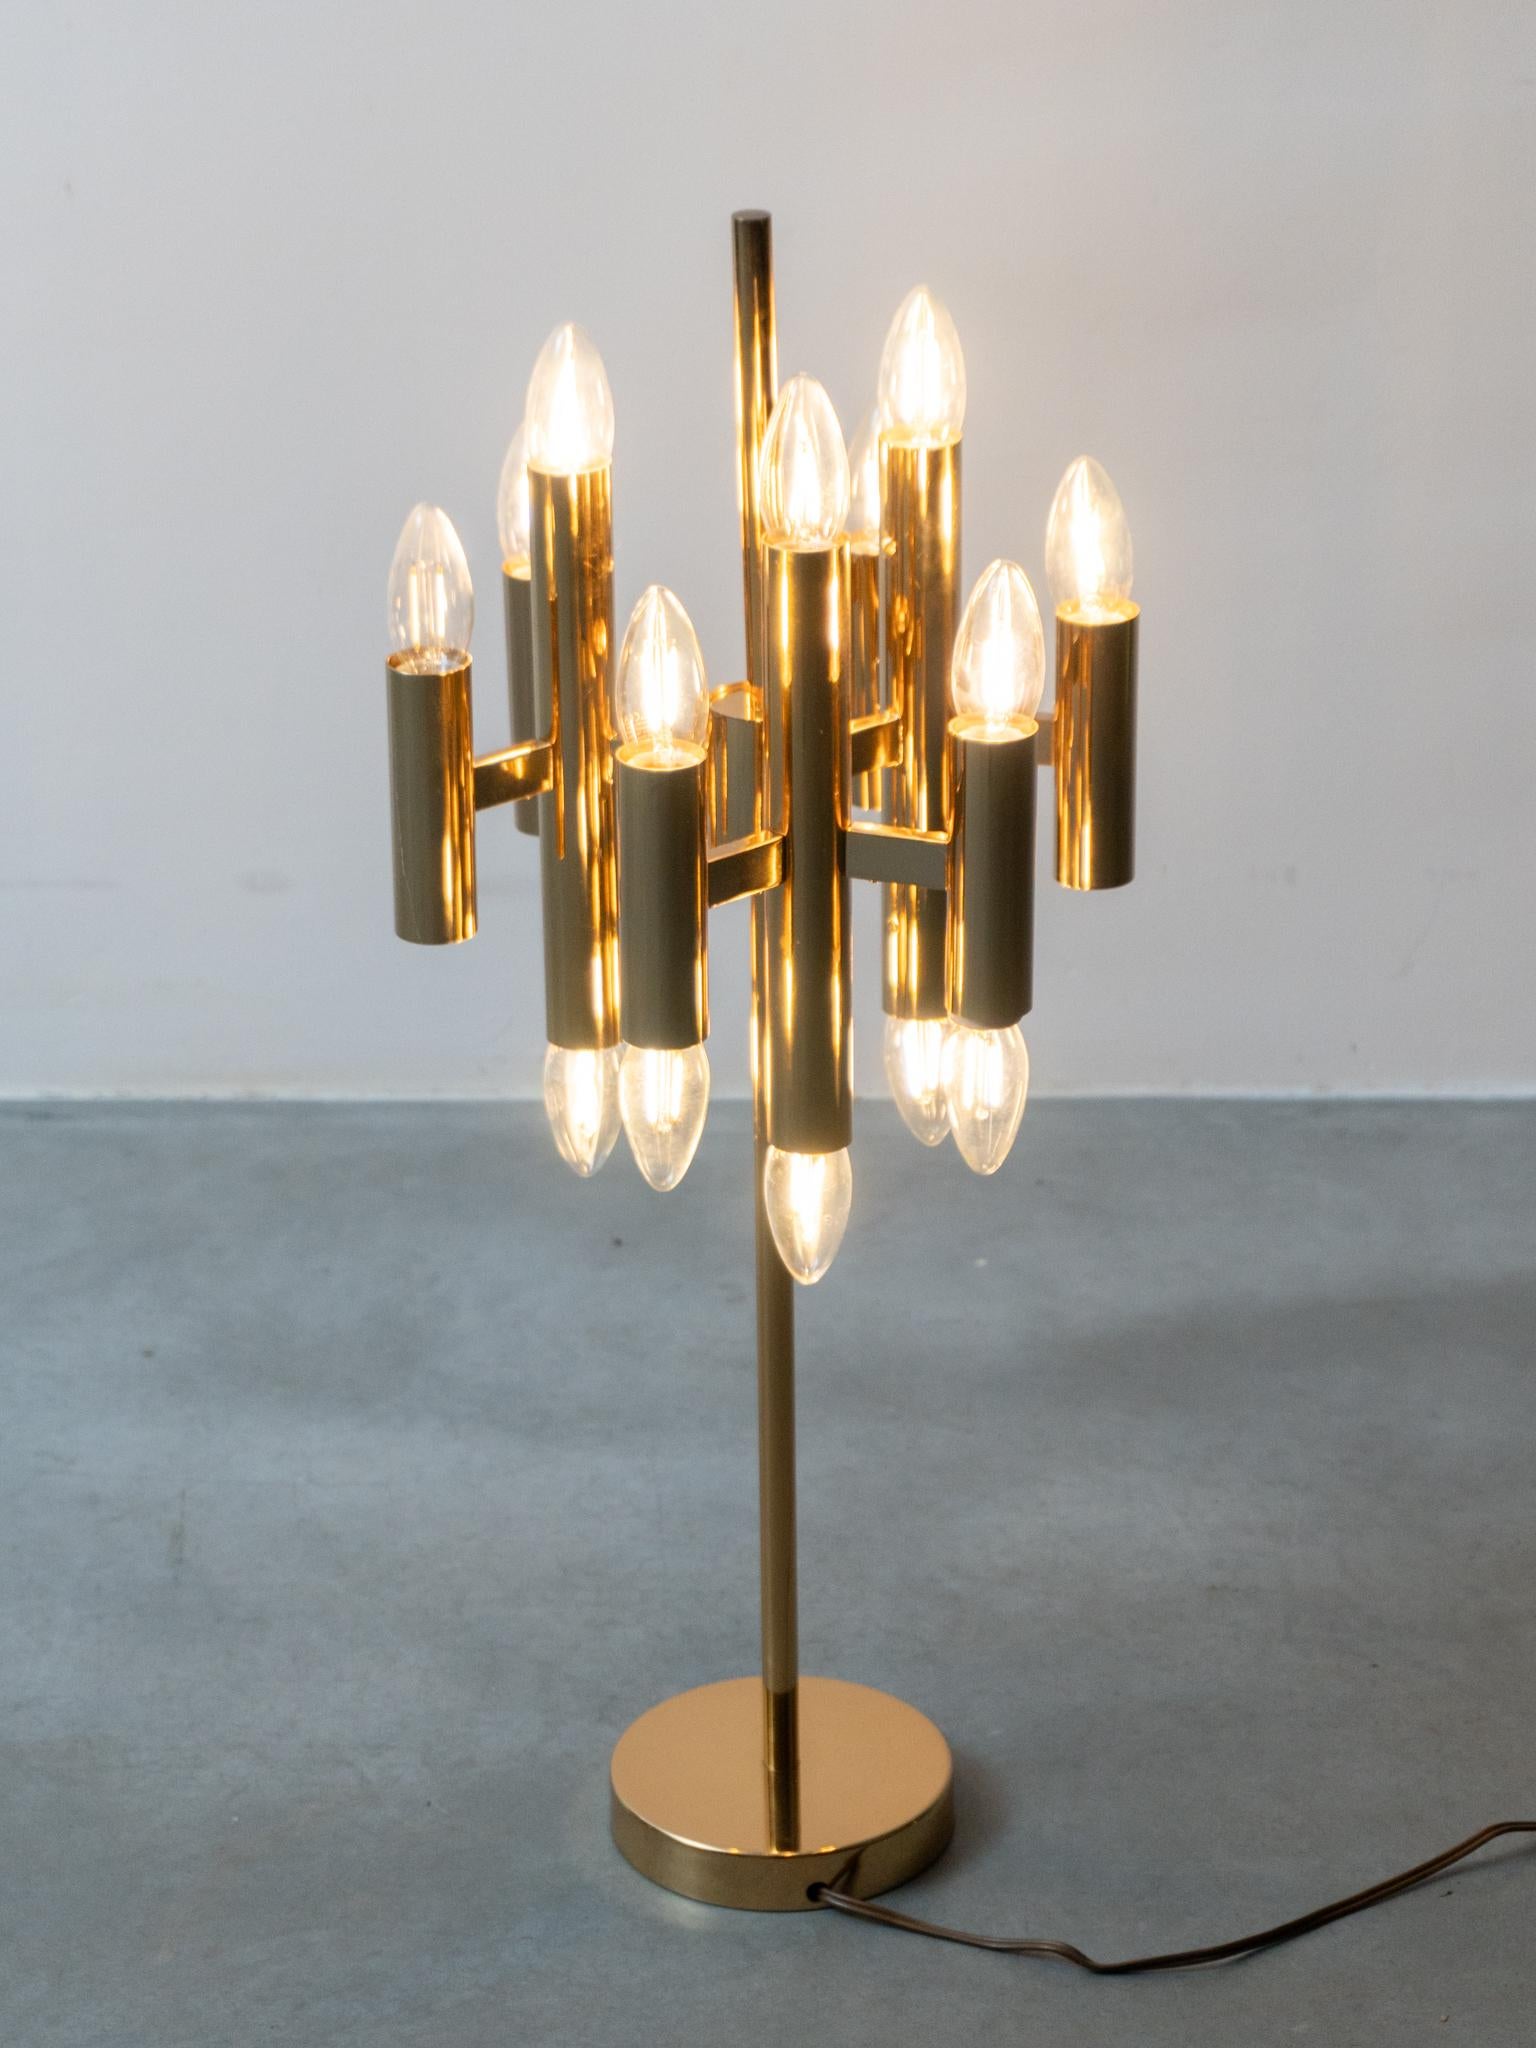 Modernist sculptural table lamp by Gaetano Sciolari for Boulanger are elegantly simple with the combination of brass gold finishes. Composed of a brass plated round base with 9 tubes brass staggered for a sculptural effect in some lights appears